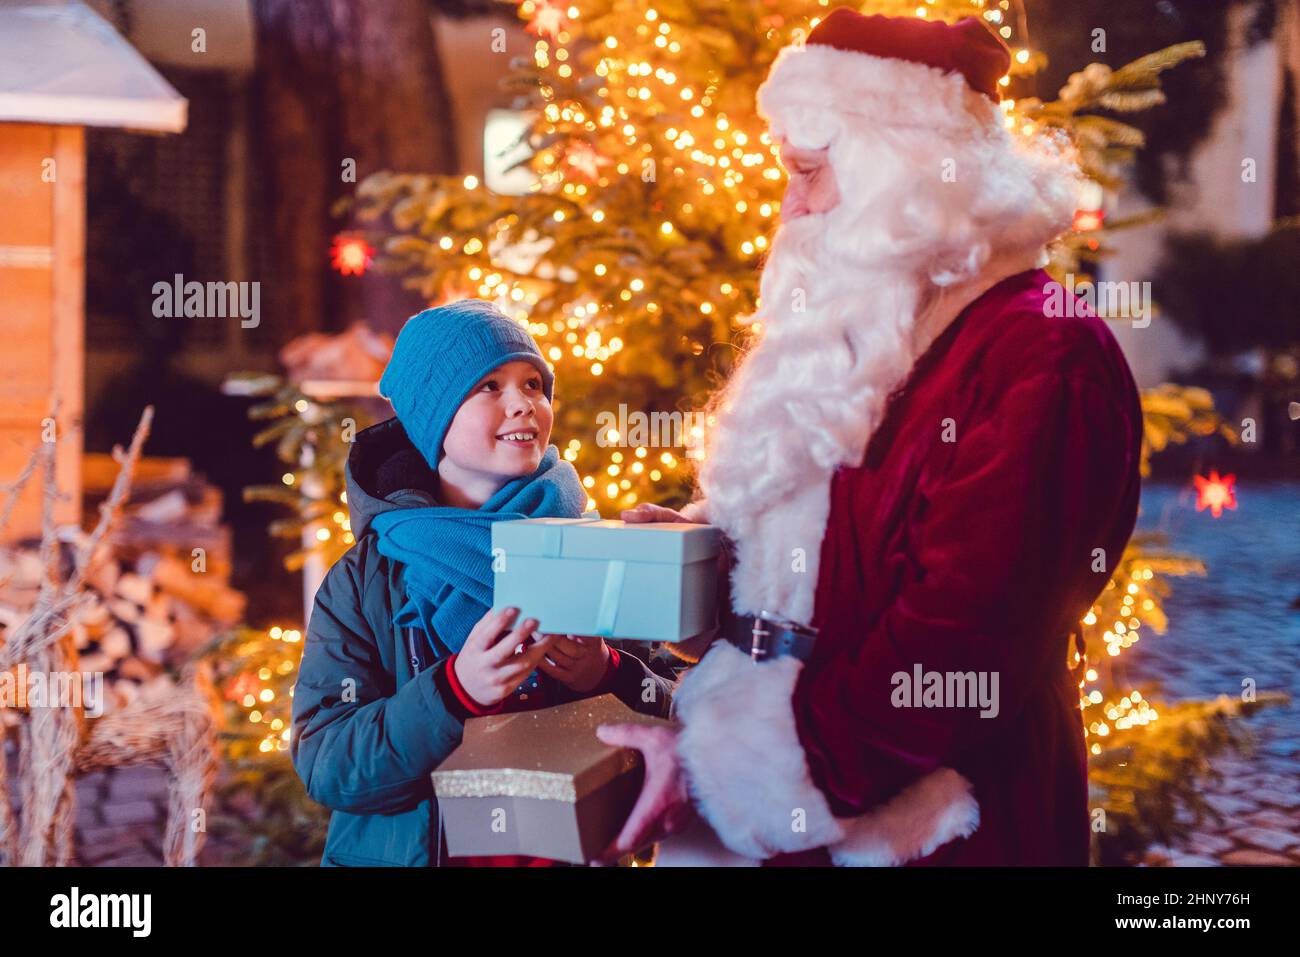 Boy receives a present from Santa Claus himself in front of Christmas tree Stock Photo